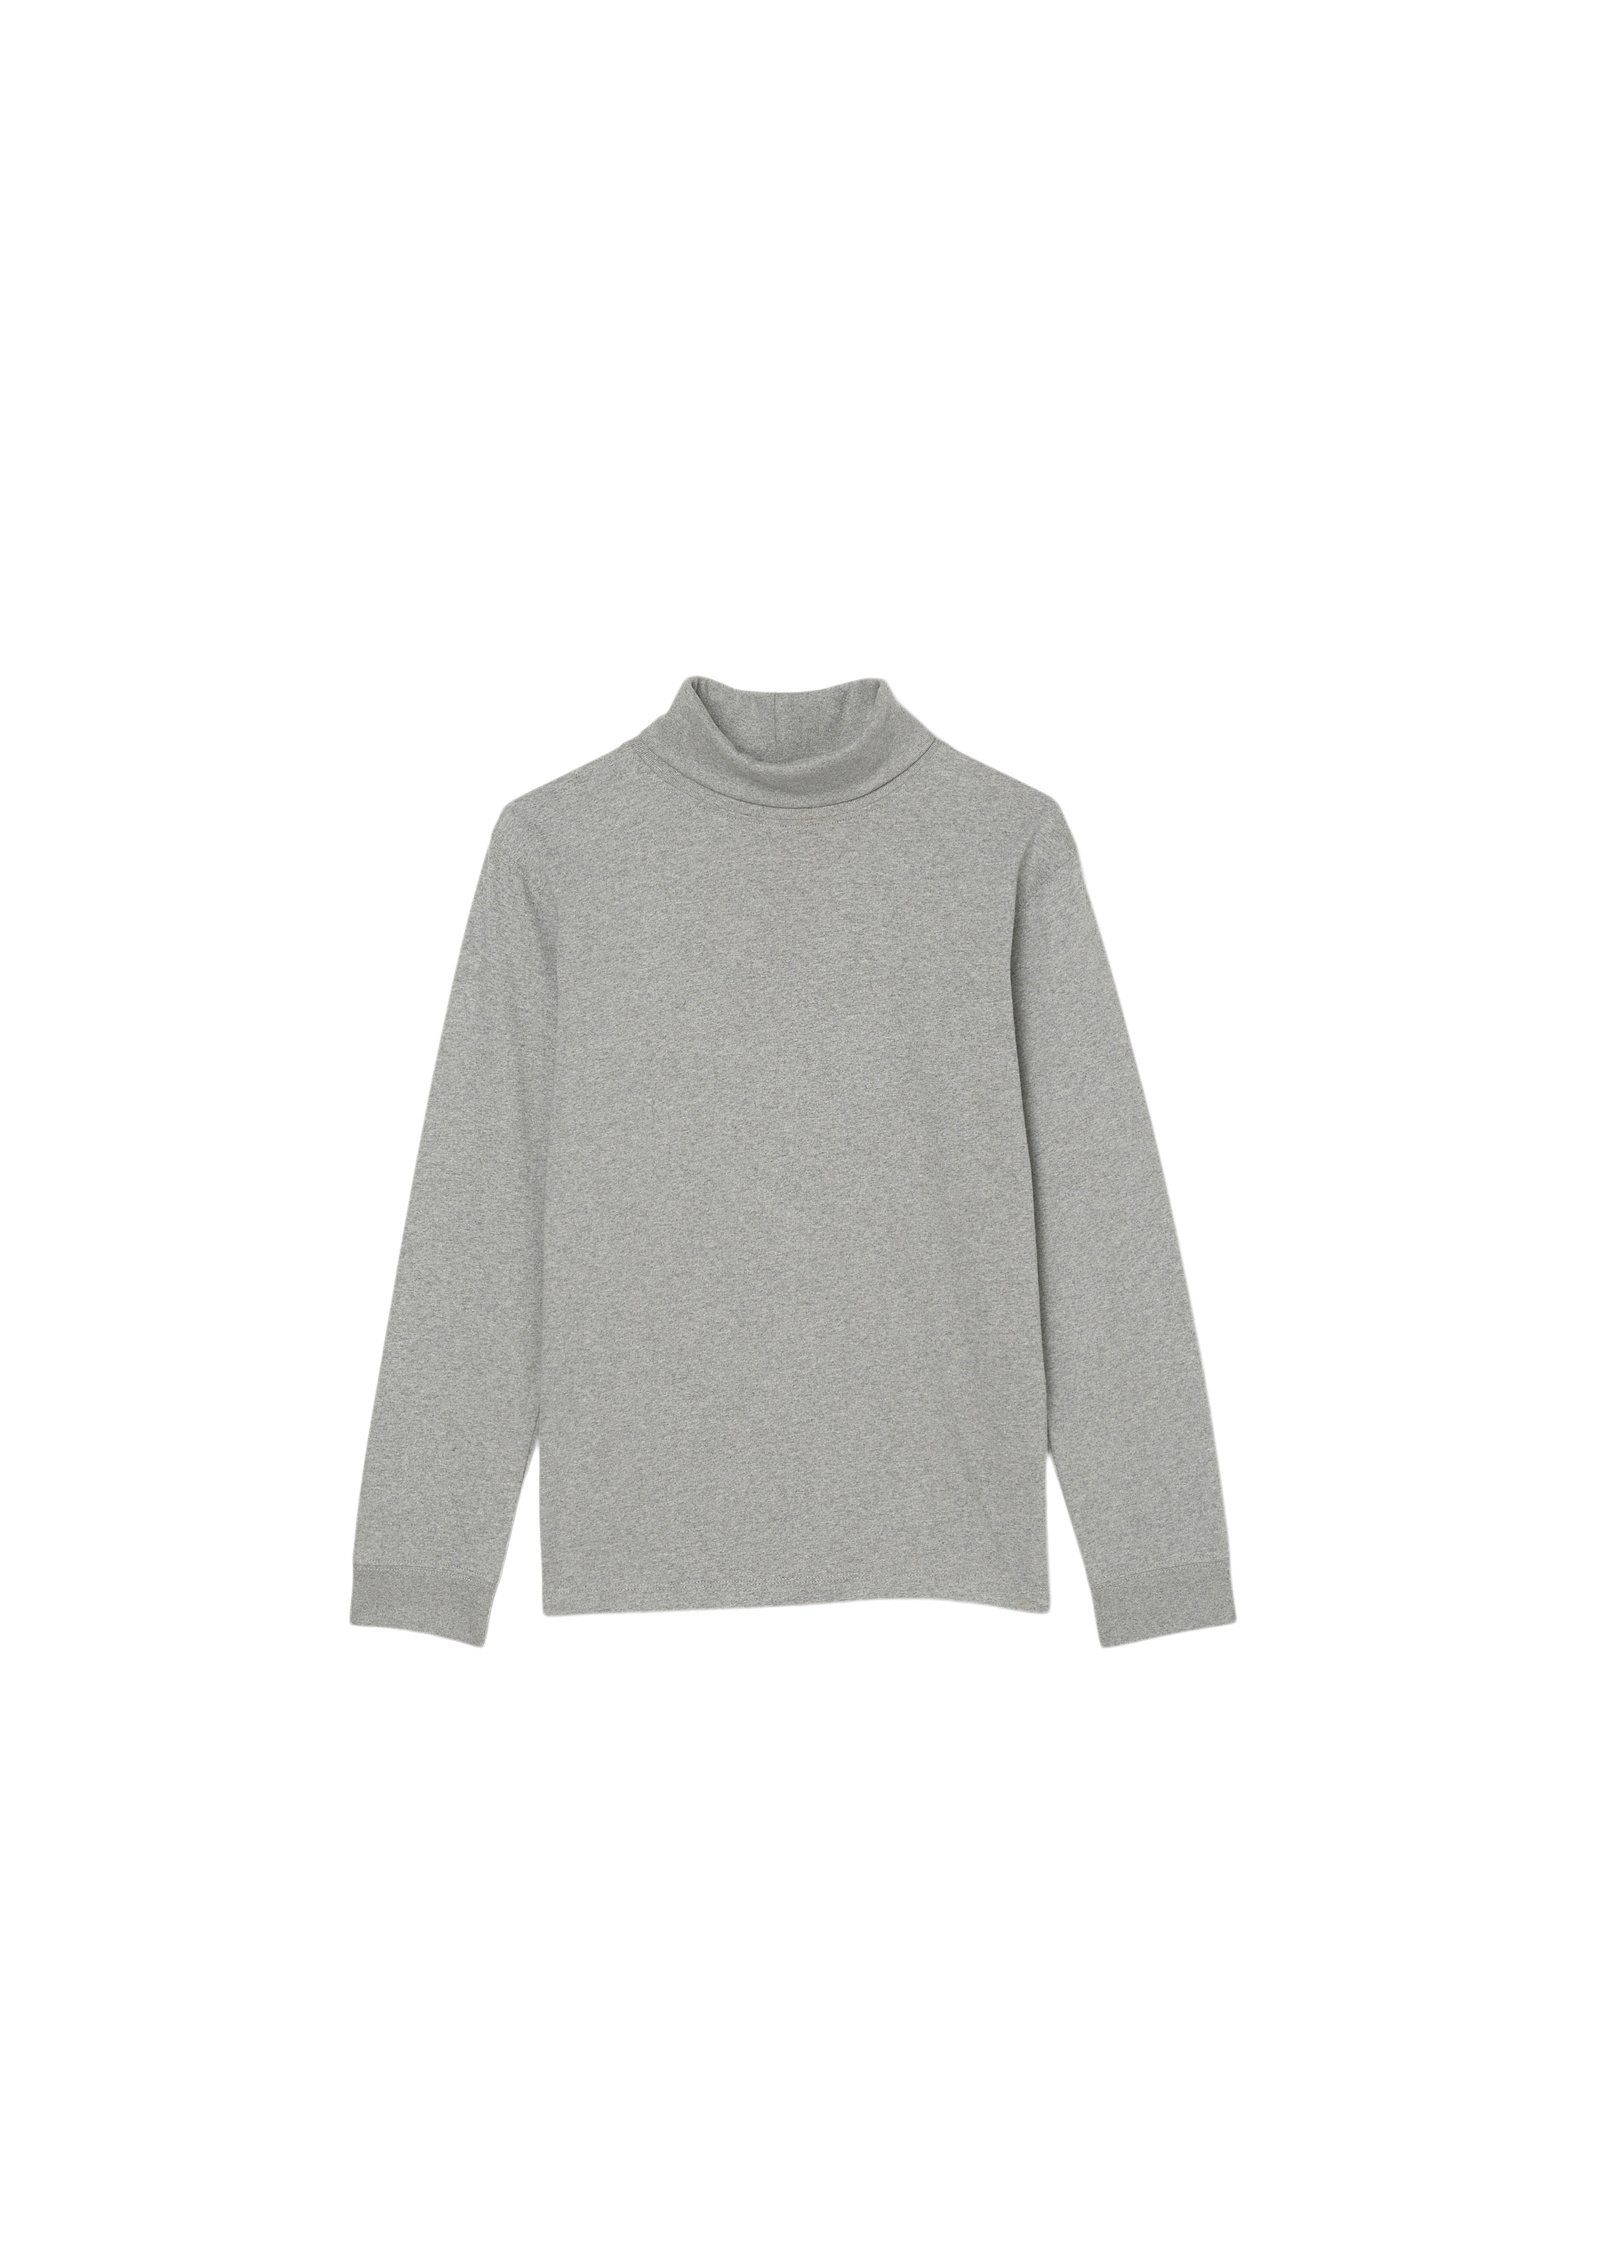 Marc O'Polo Strickpullover in softer grau Jersey-Qualität